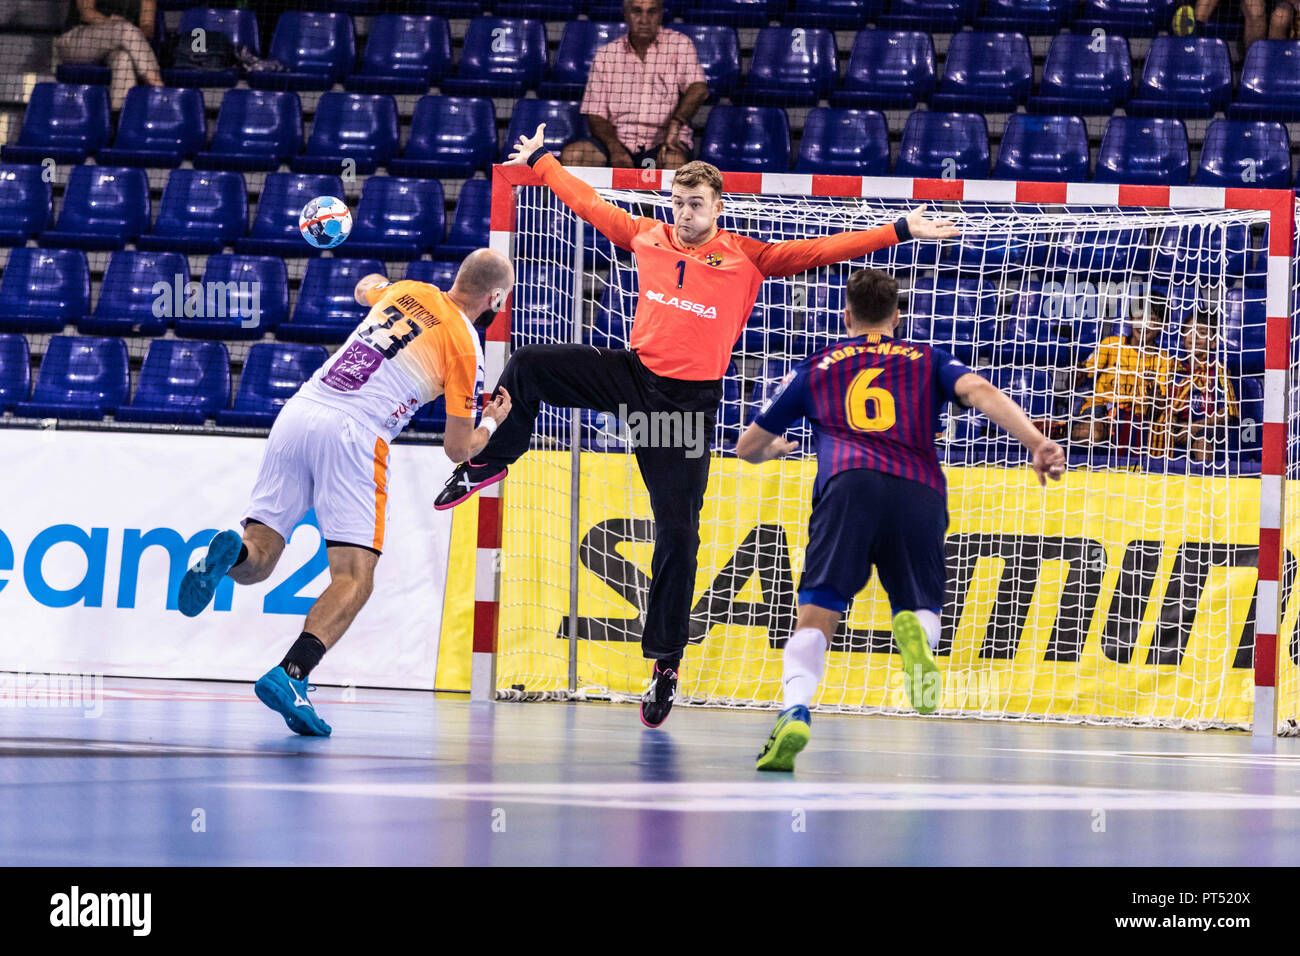 October 6, 2018 - Gonzalo Perez de Vargas Moreno, #1 of FC Barcelona Lassa in actions during VELUX EHF Champions League match between Fc Barcelona Lassa and Montpellier HB on October 06, 2018 at Palau Blaugrana, in Barcelona, Spain. Credit: AFP7/ZUMA Wire/Alamy Live News Stock Photo